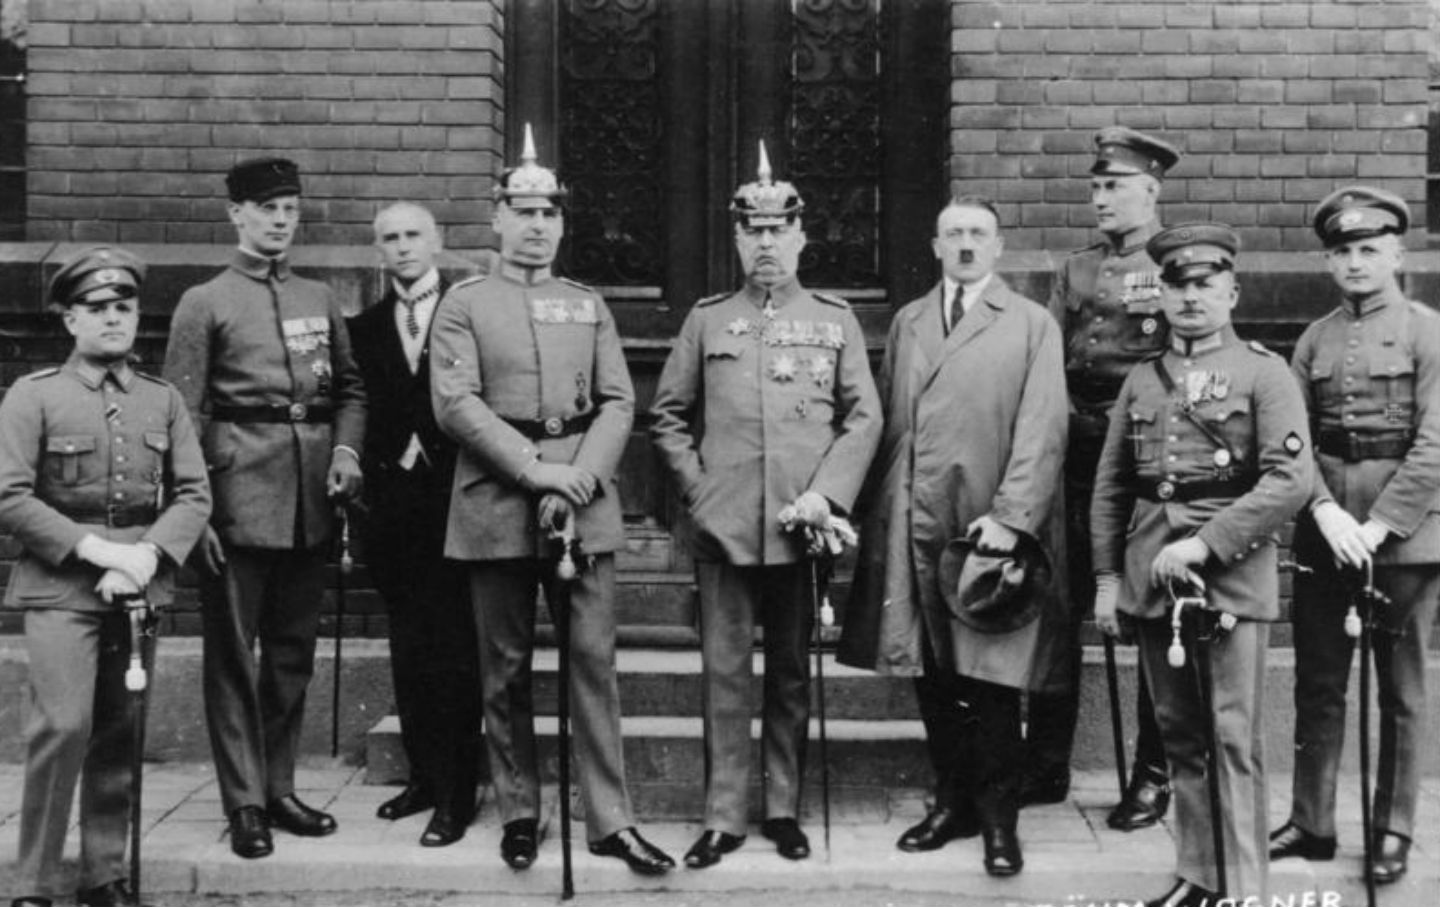 November 8, 1923: Adolf Hitler Attempts a Coup in Germany—the ‘Beer Hall Putsch’